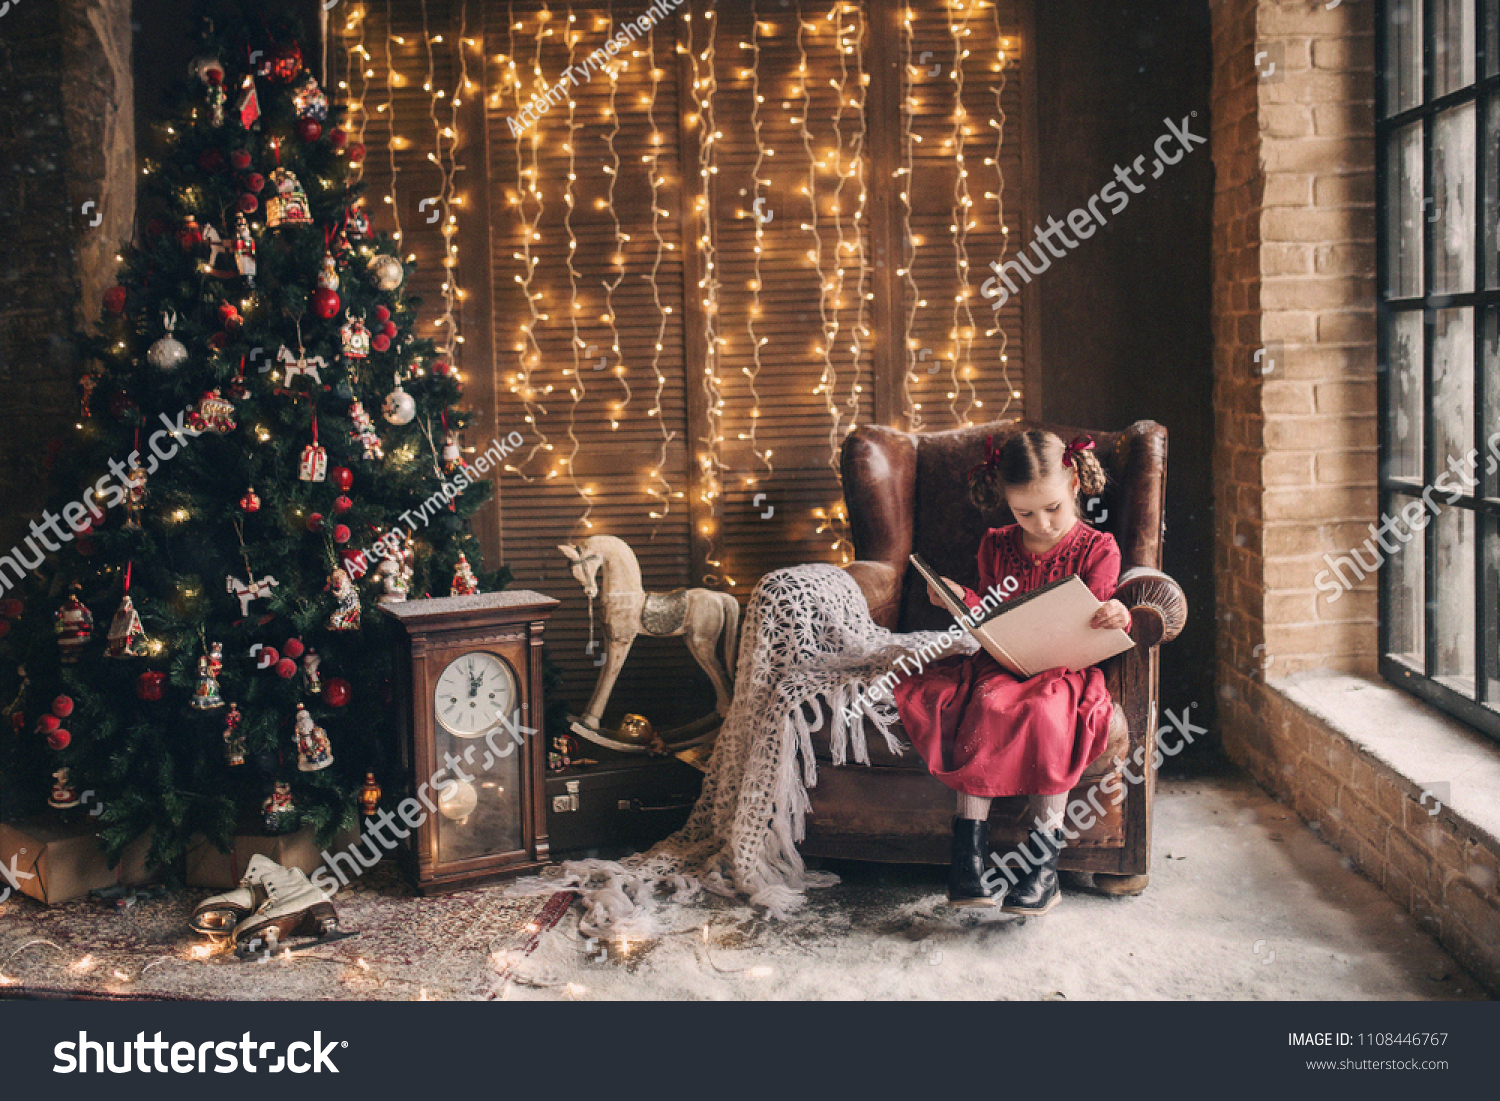 little girl is sitting in a chair and thumbs through a vintage photo album next to a Christmas tree on a background of Christmas lights, photo in retro style #1108446767